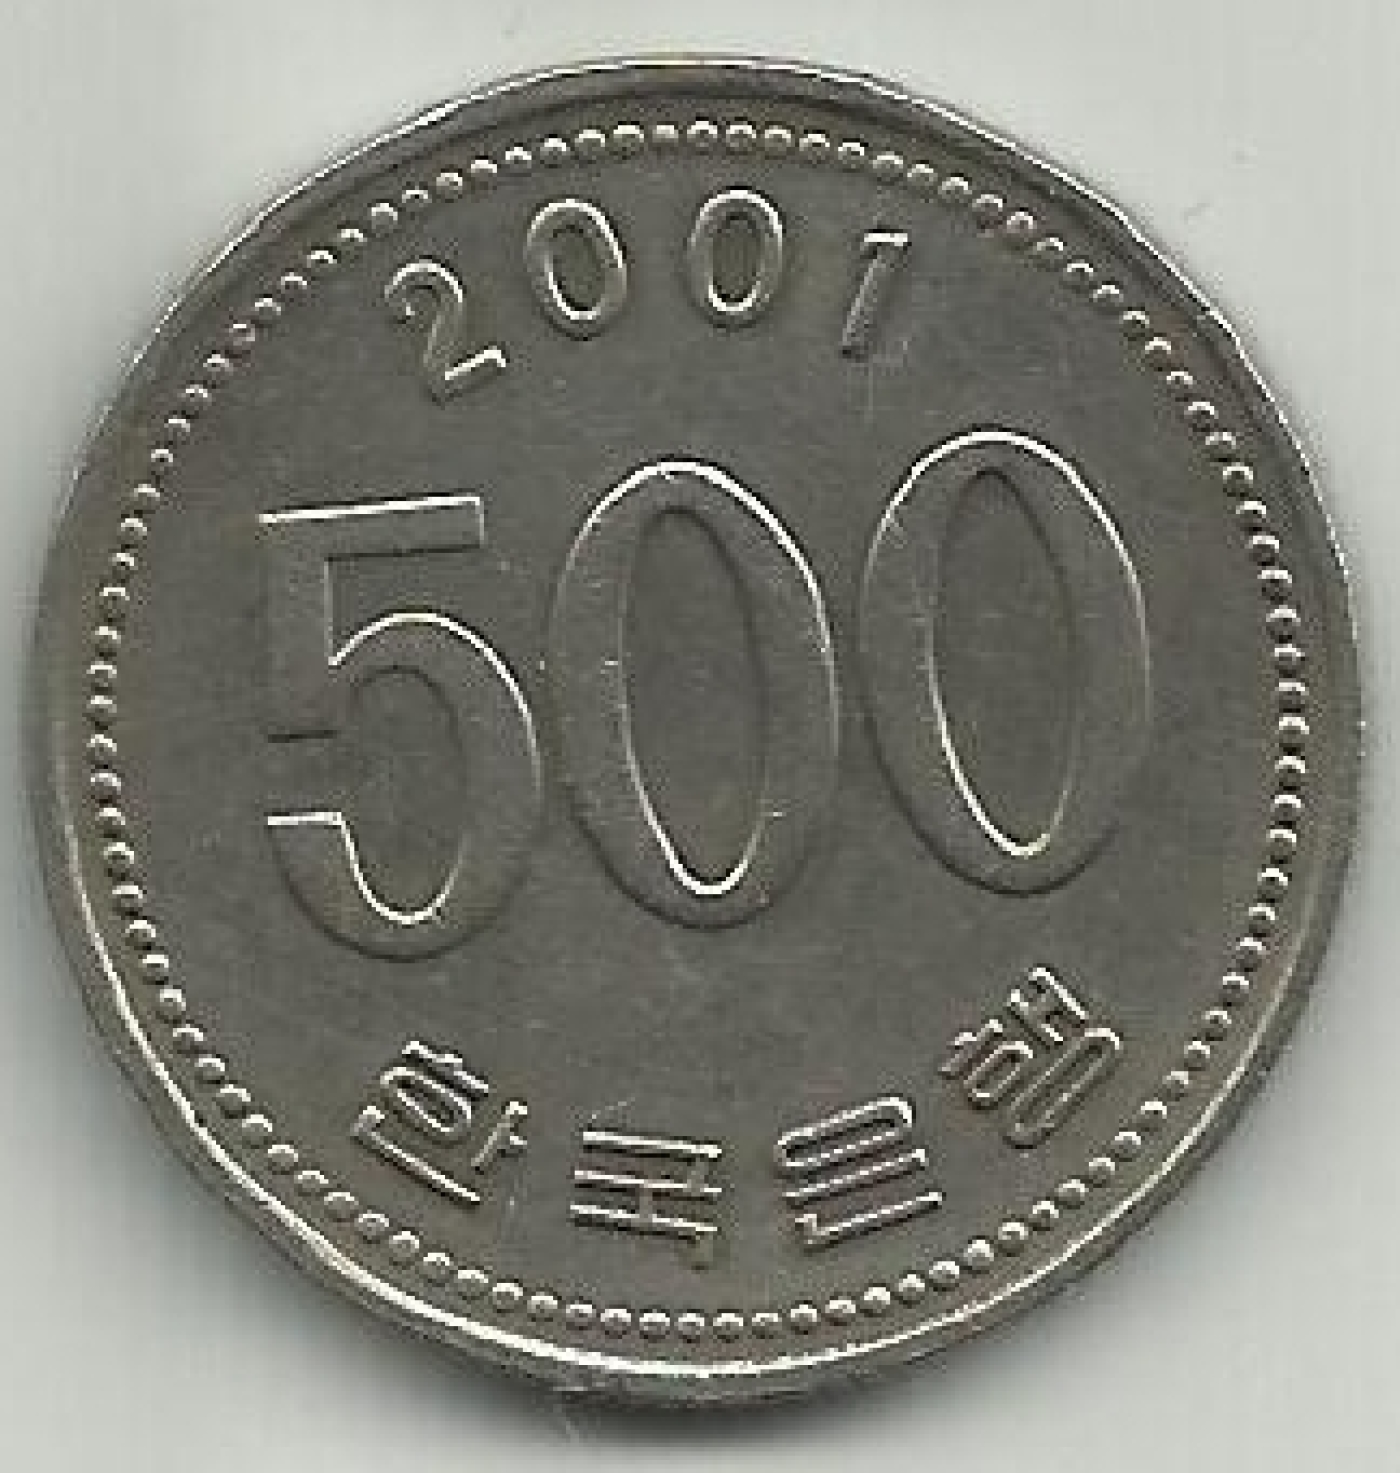 SOUTH KOREA COINS VALUE ✓ Updated 